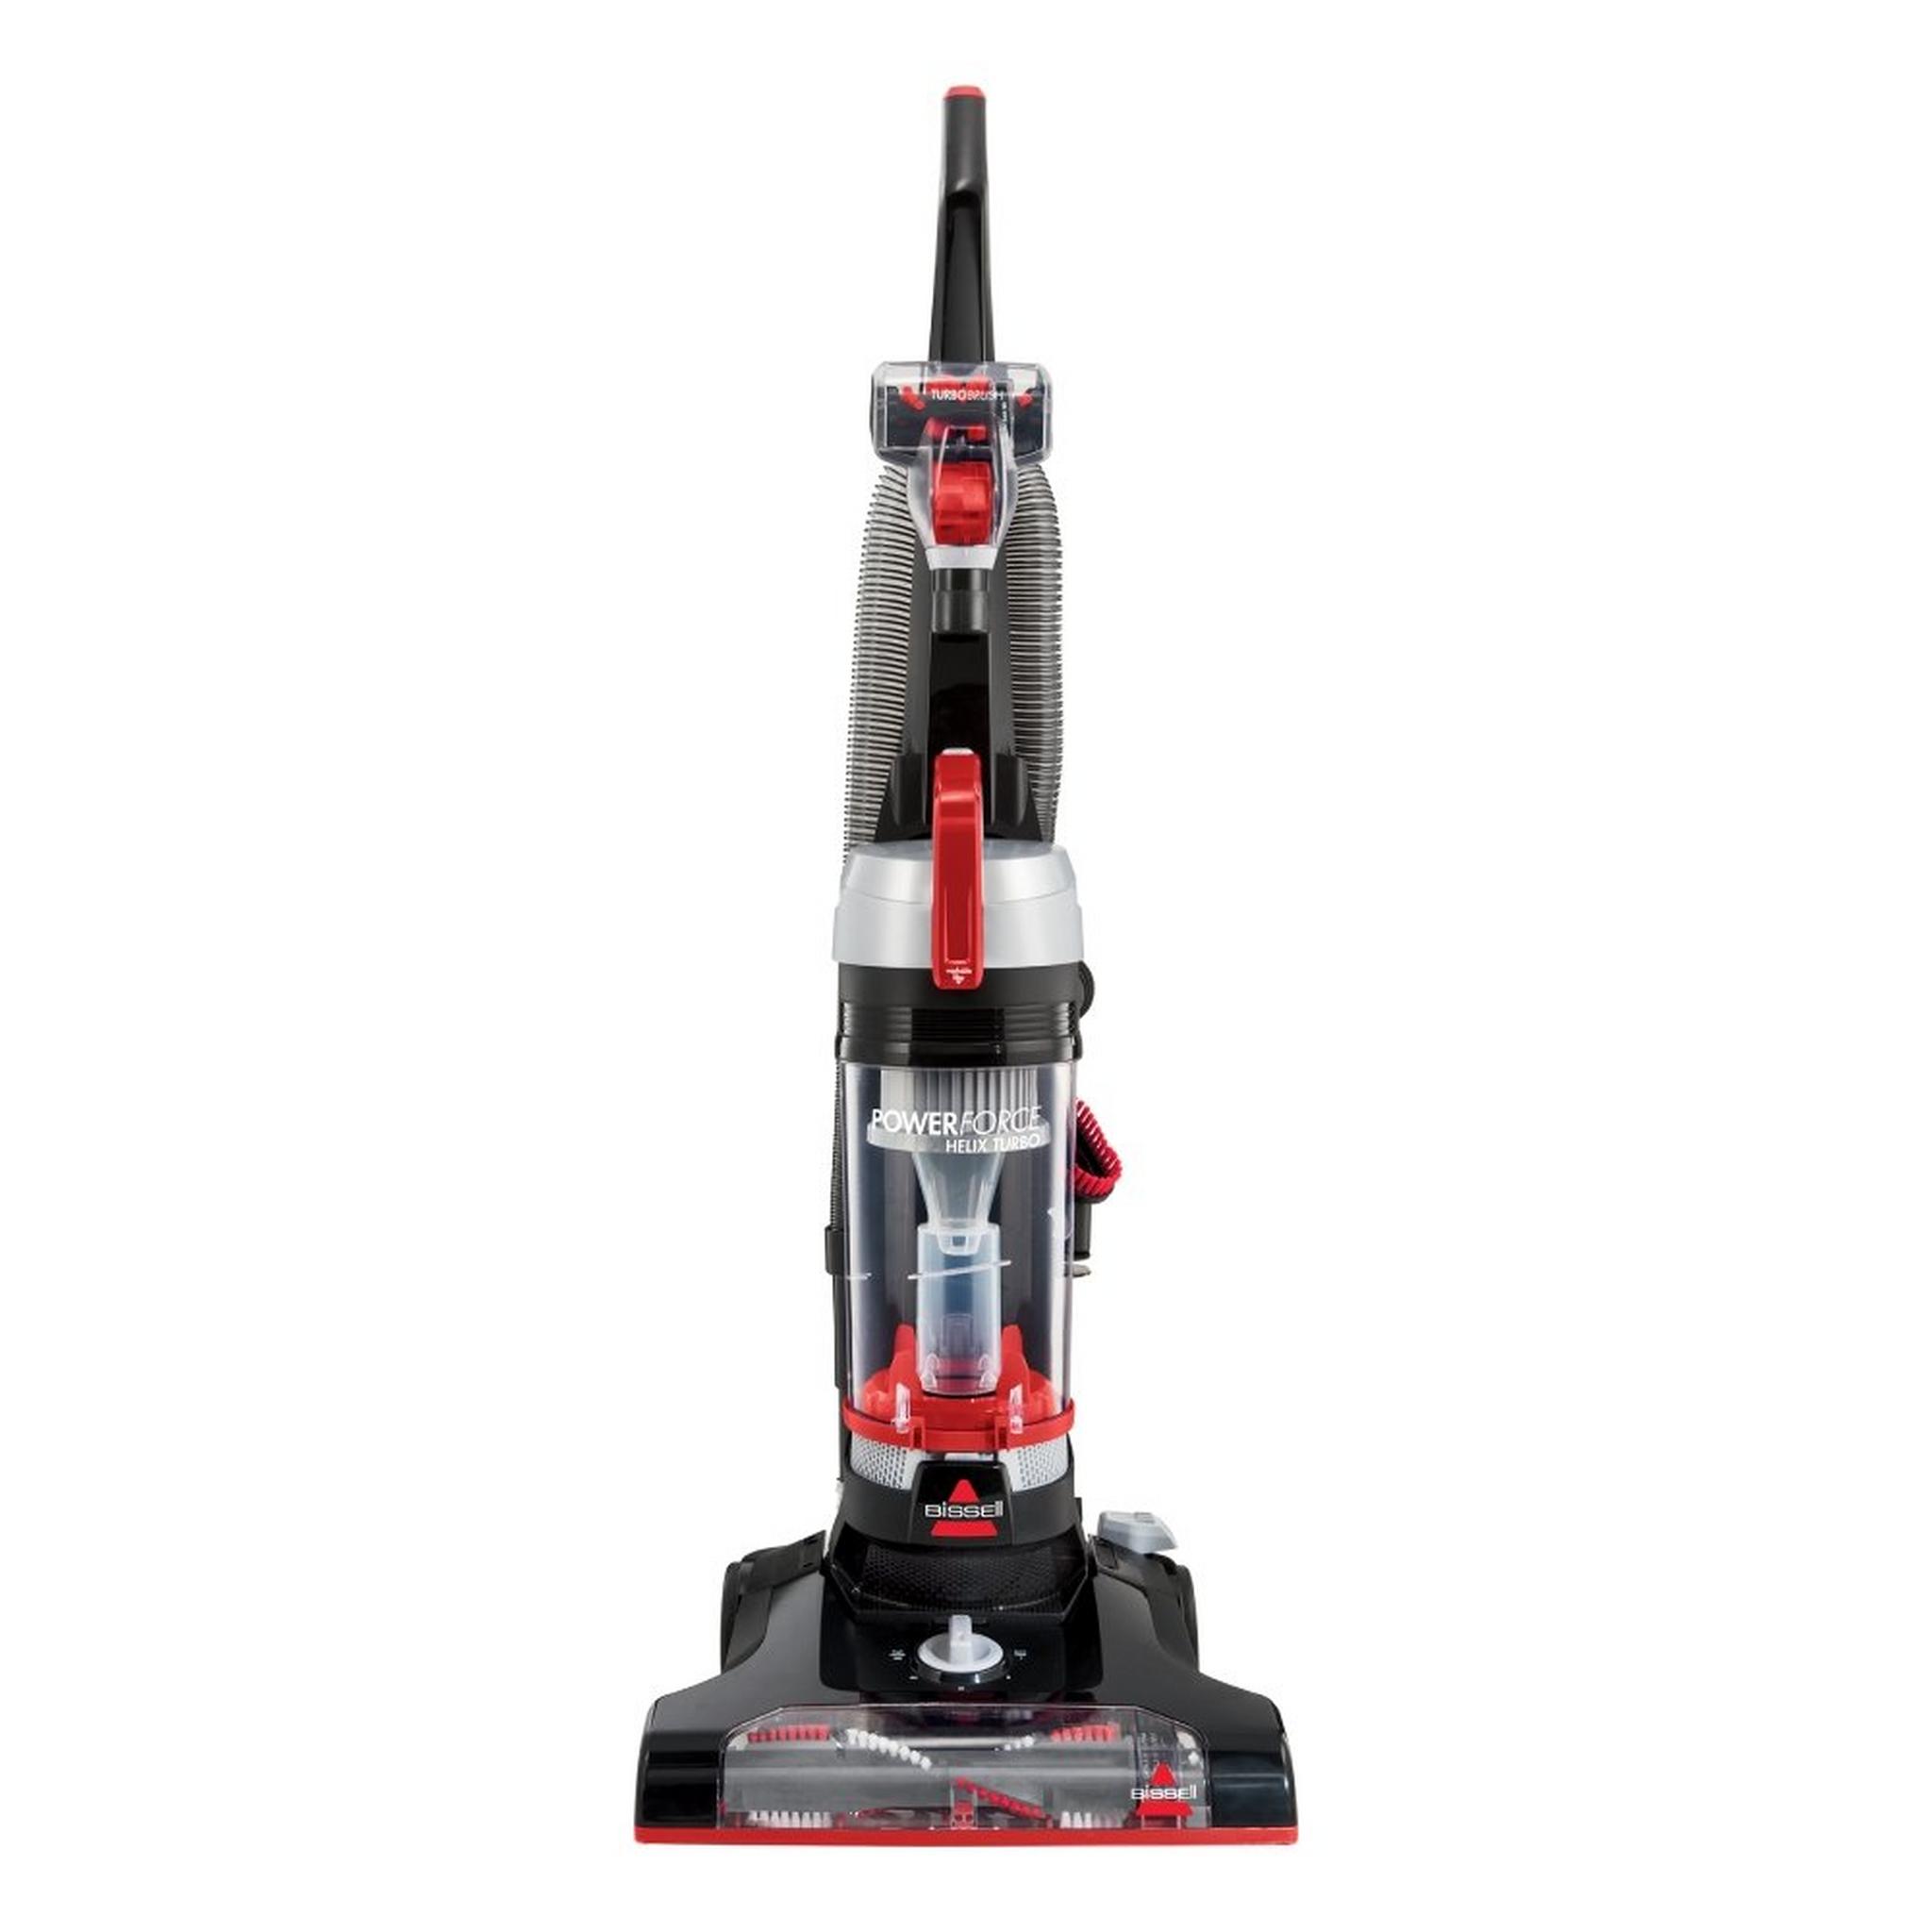 Bissell PowerForce Helix Turbo Cleaner, 1100 W, 1 Liters, 2110E - Black/Red